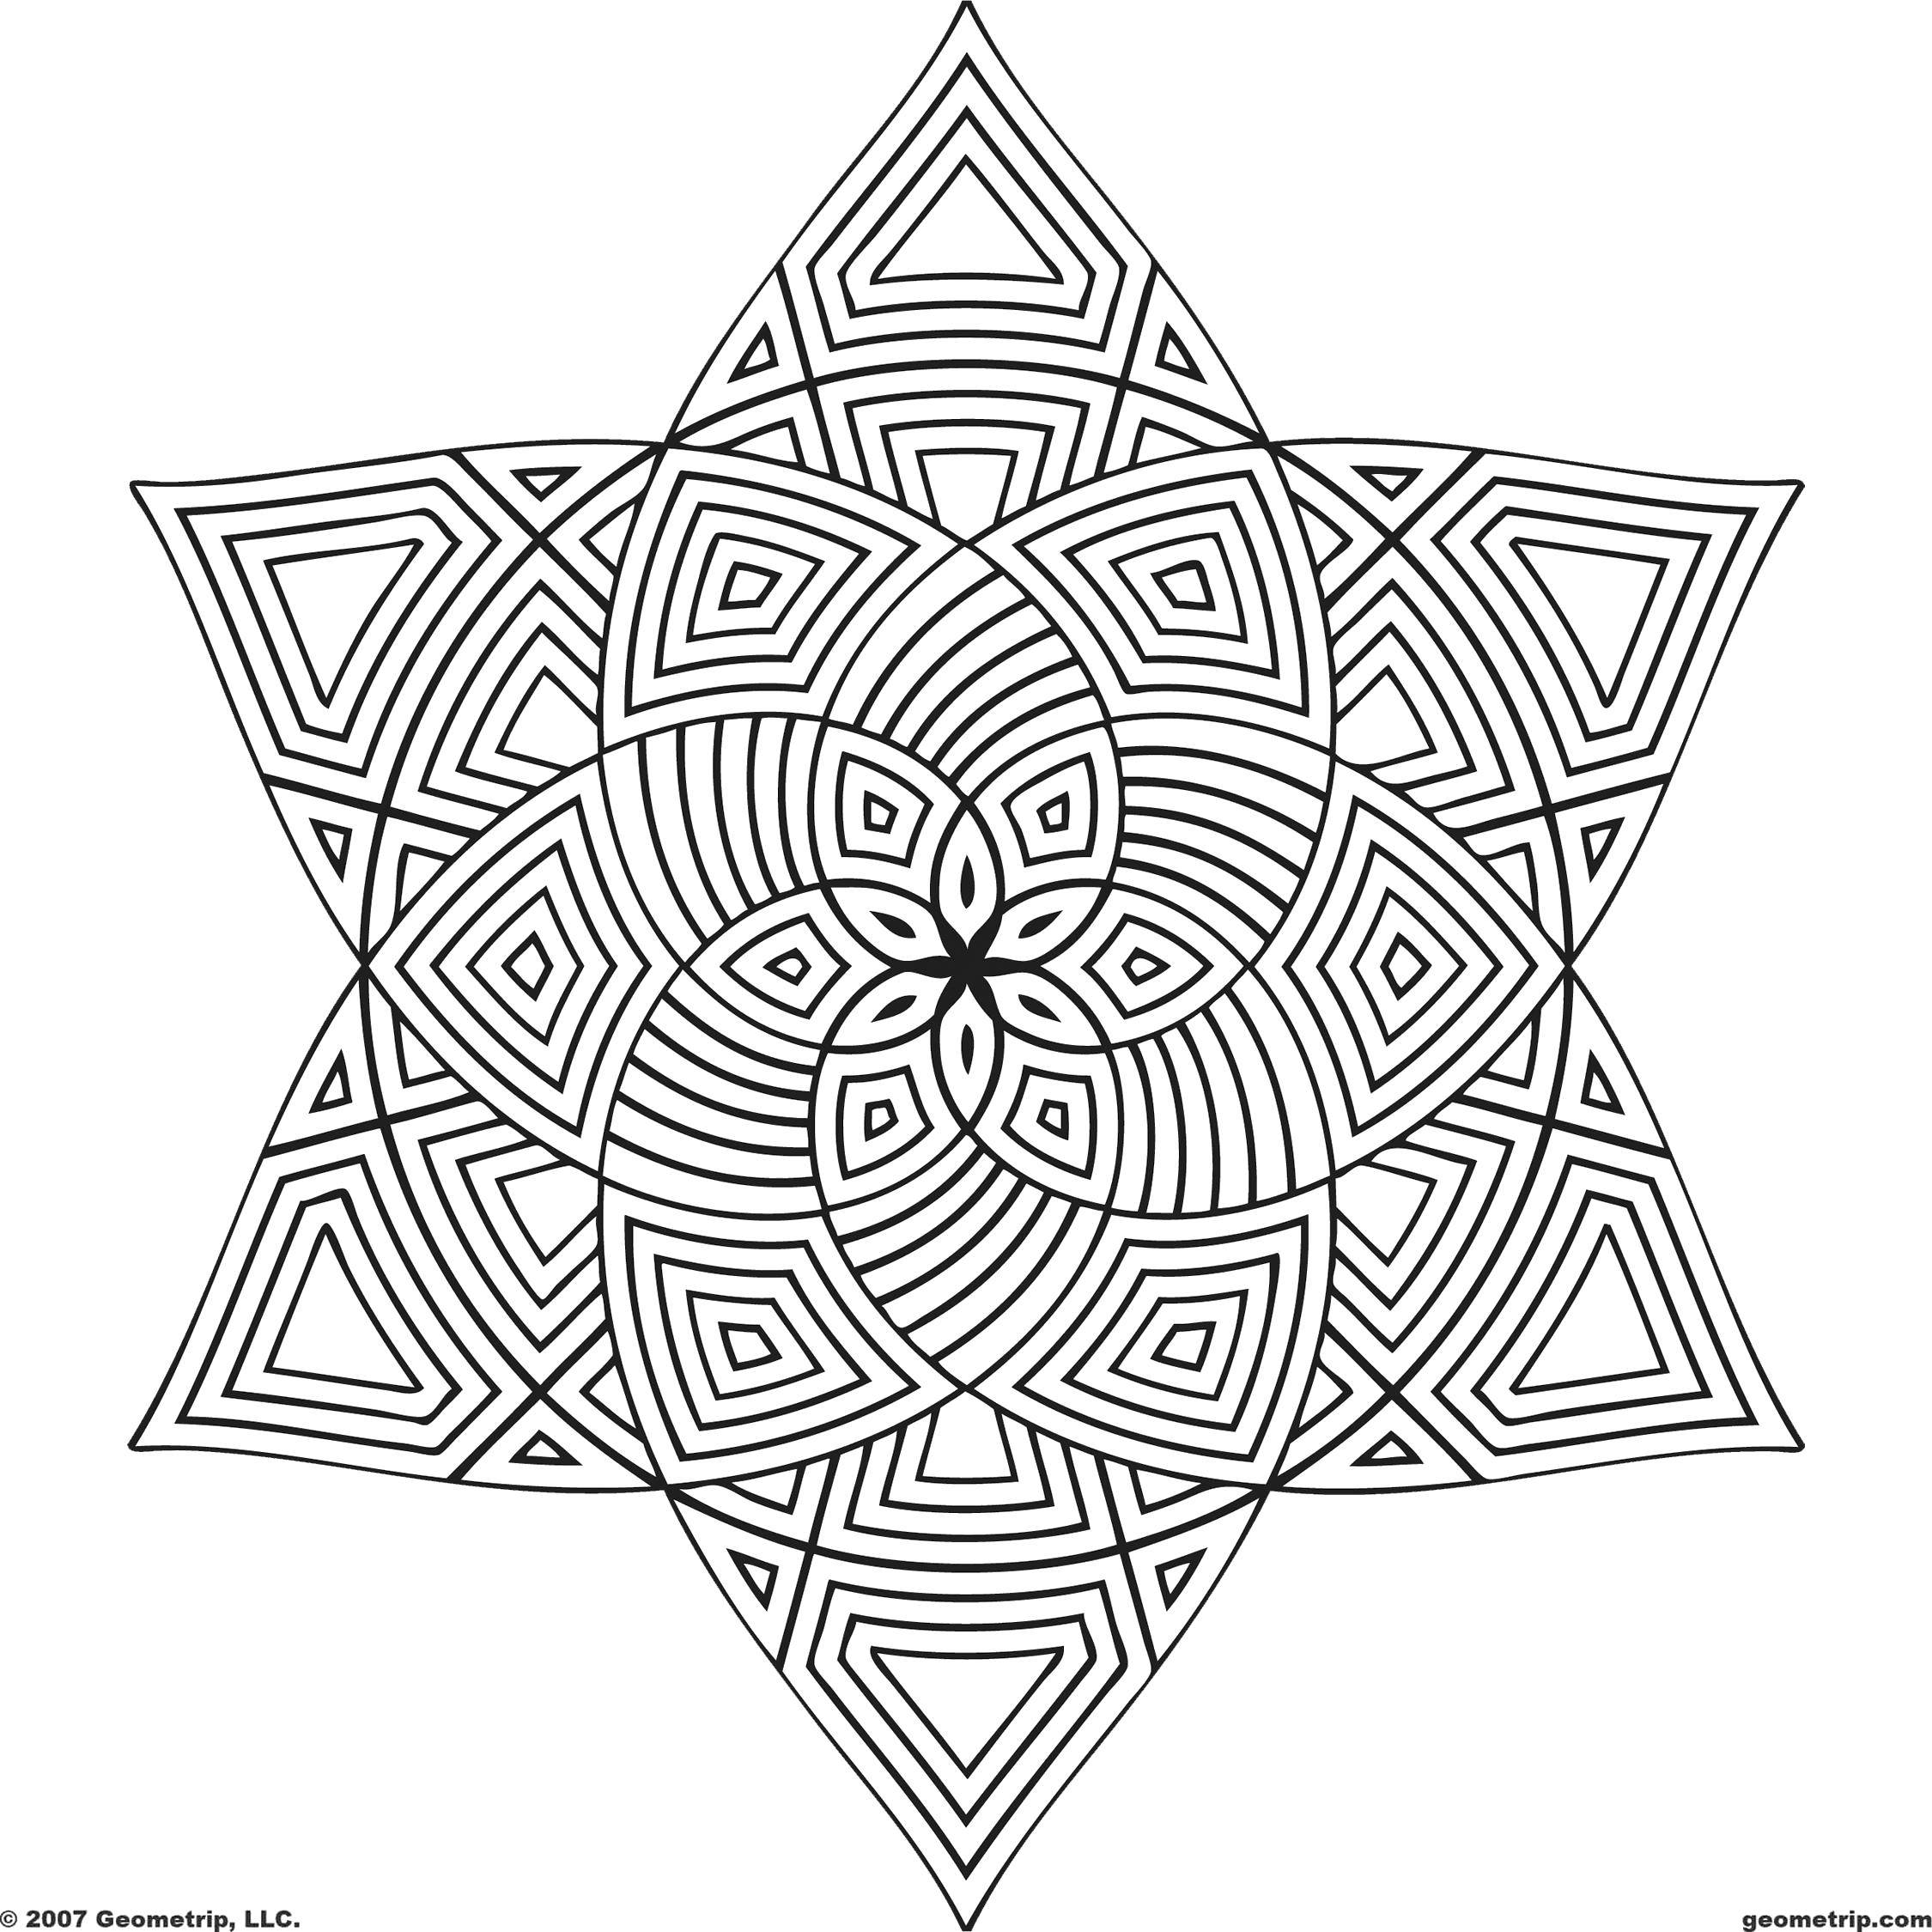 Coloring Geometric flower. Category Patterns. Tags:  Patterns, geometric.